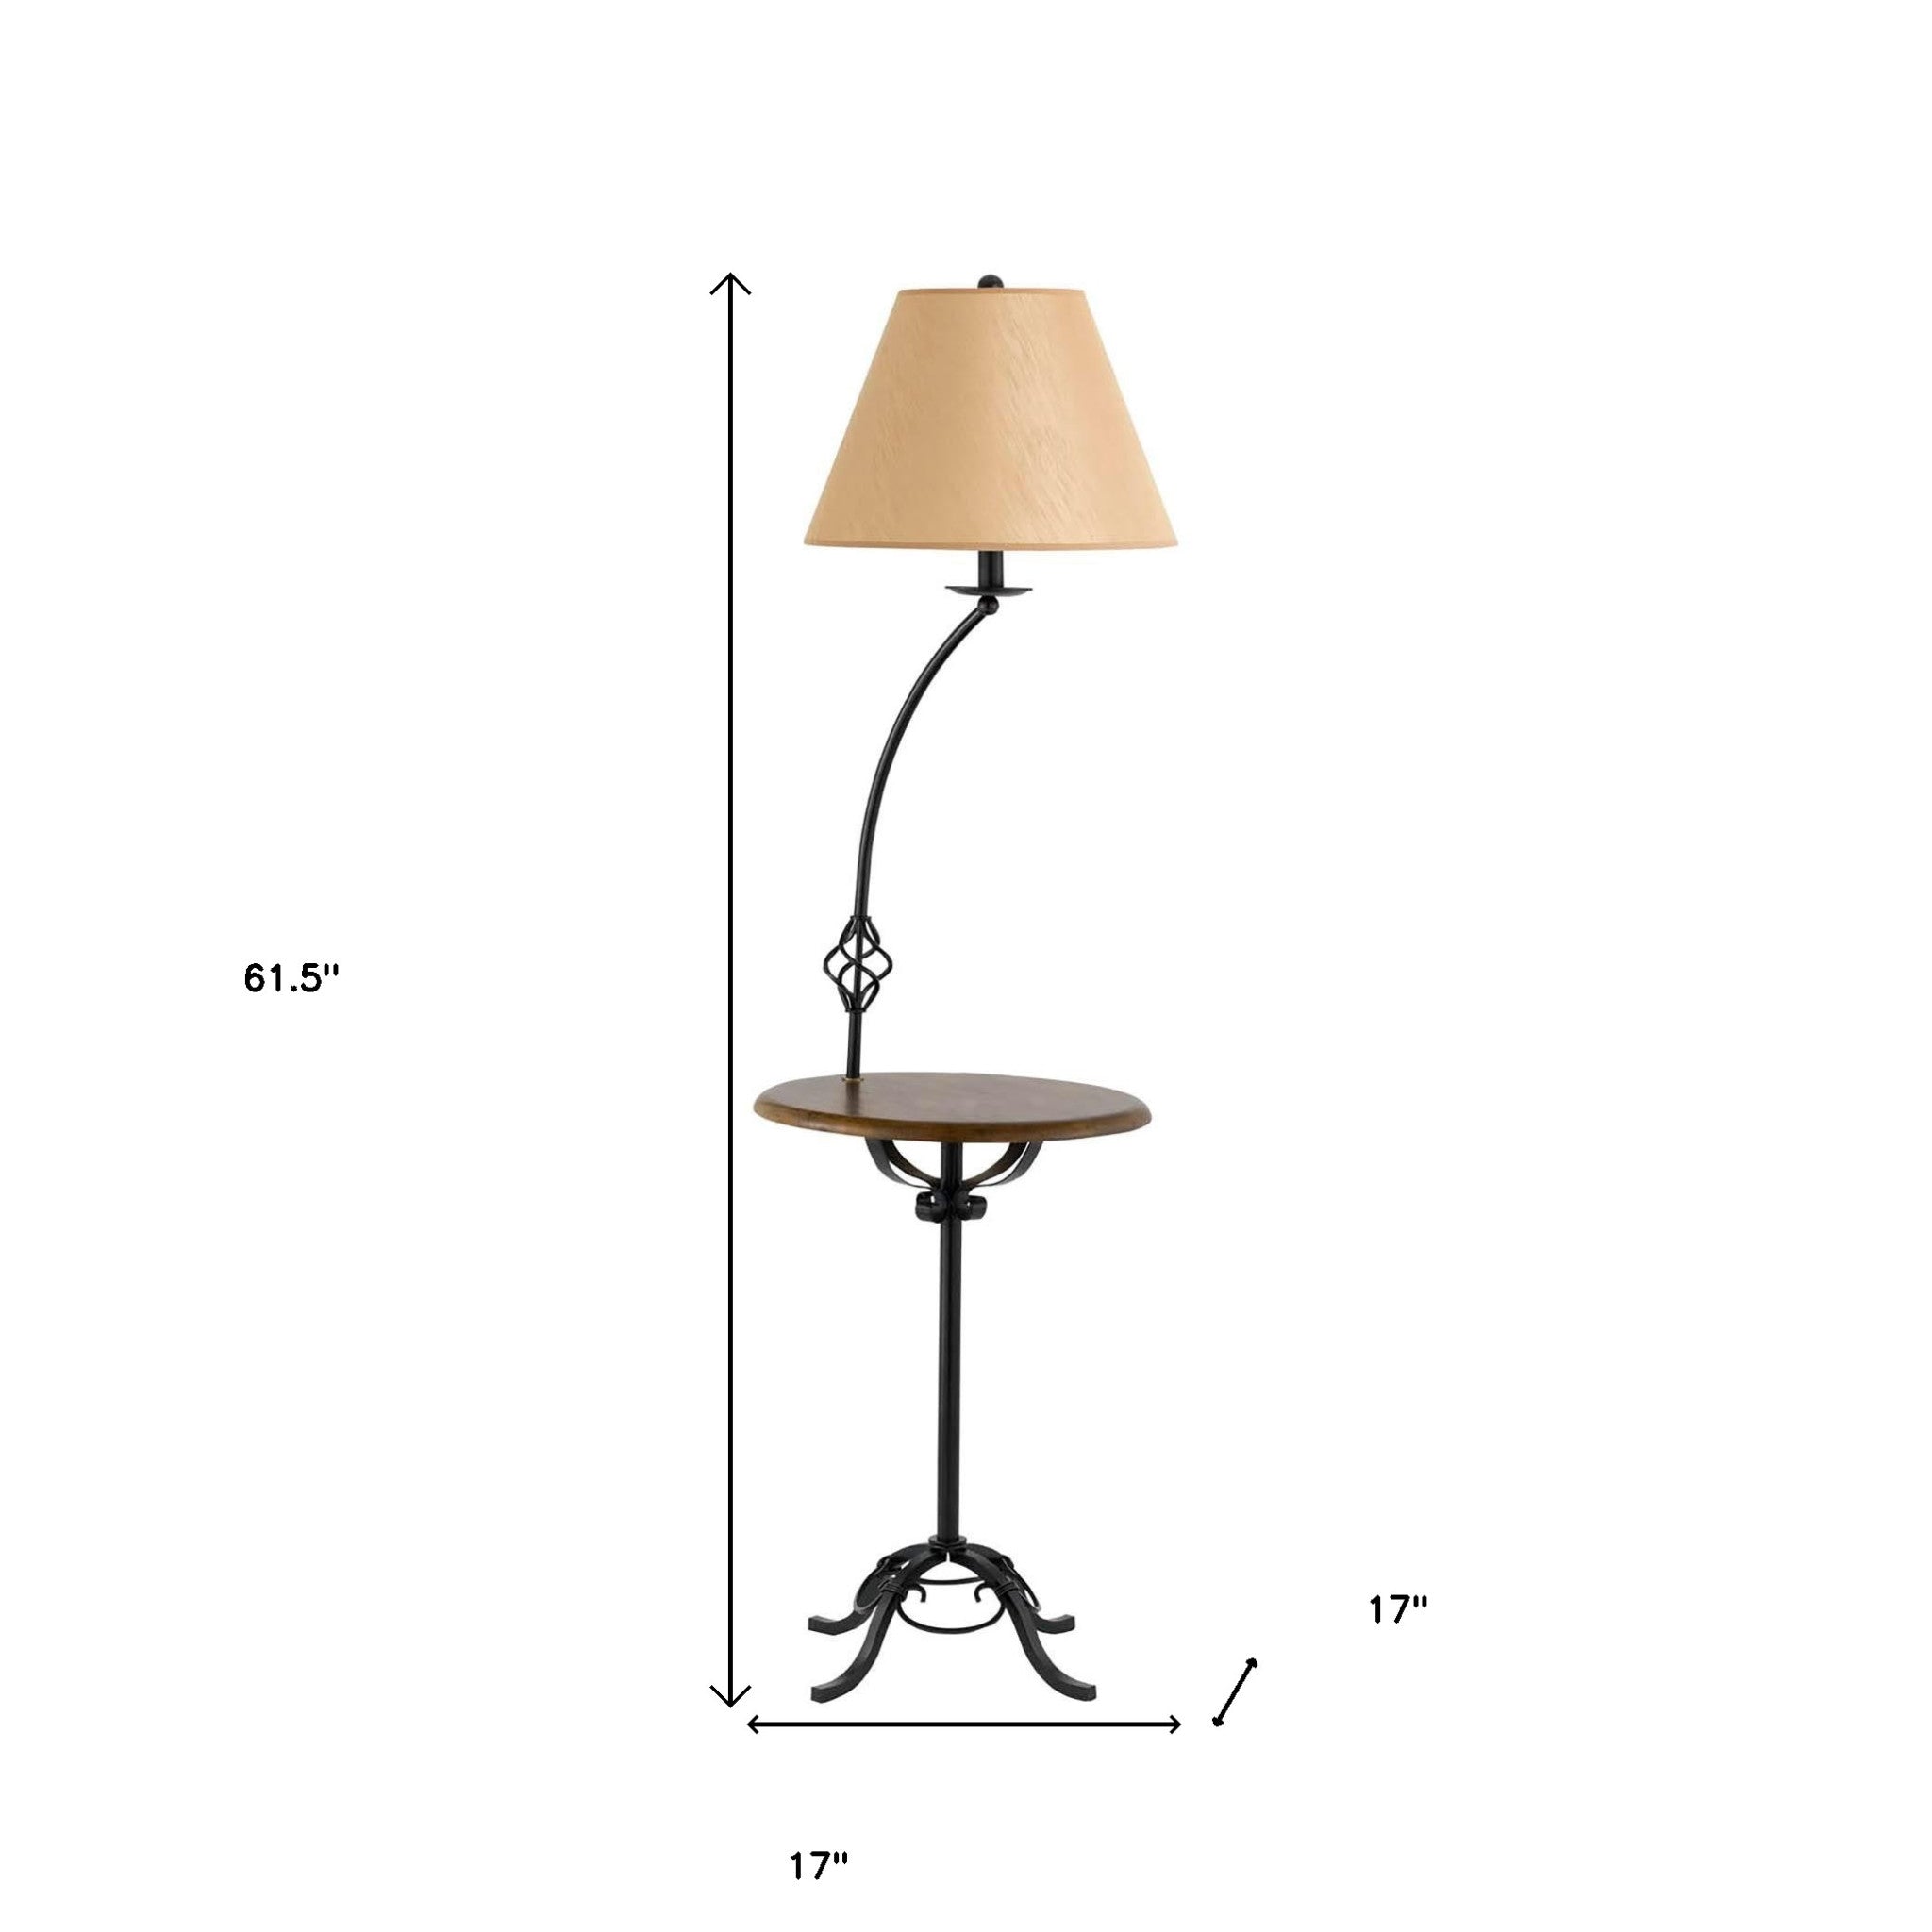 62" Black Tray Table Floor Lamp With Brown Empire Shade